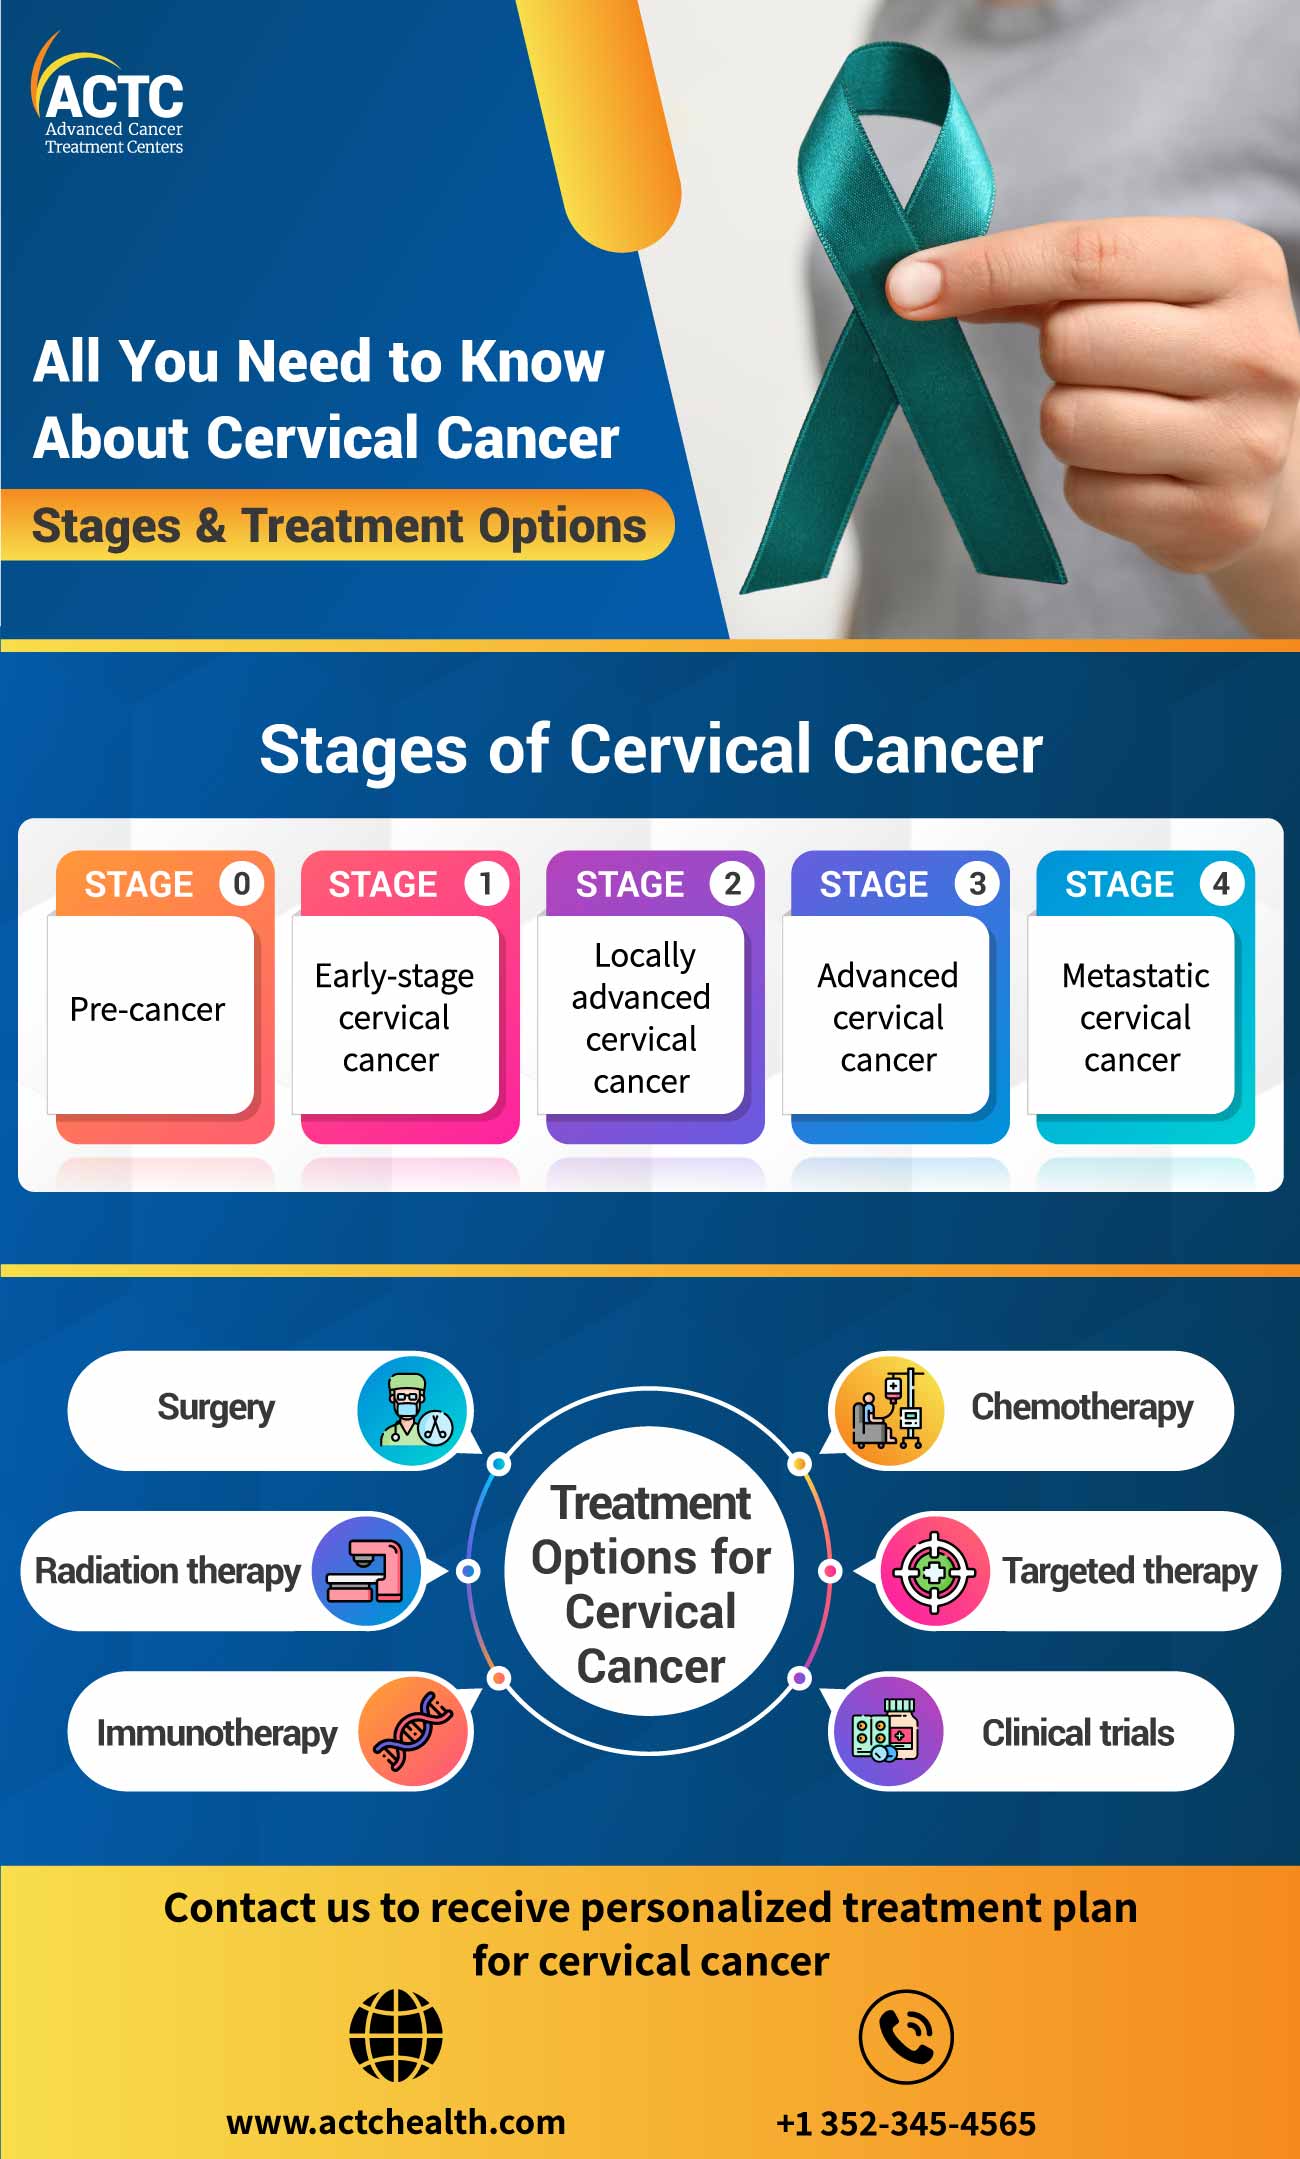 Coping with Cervical Cancer